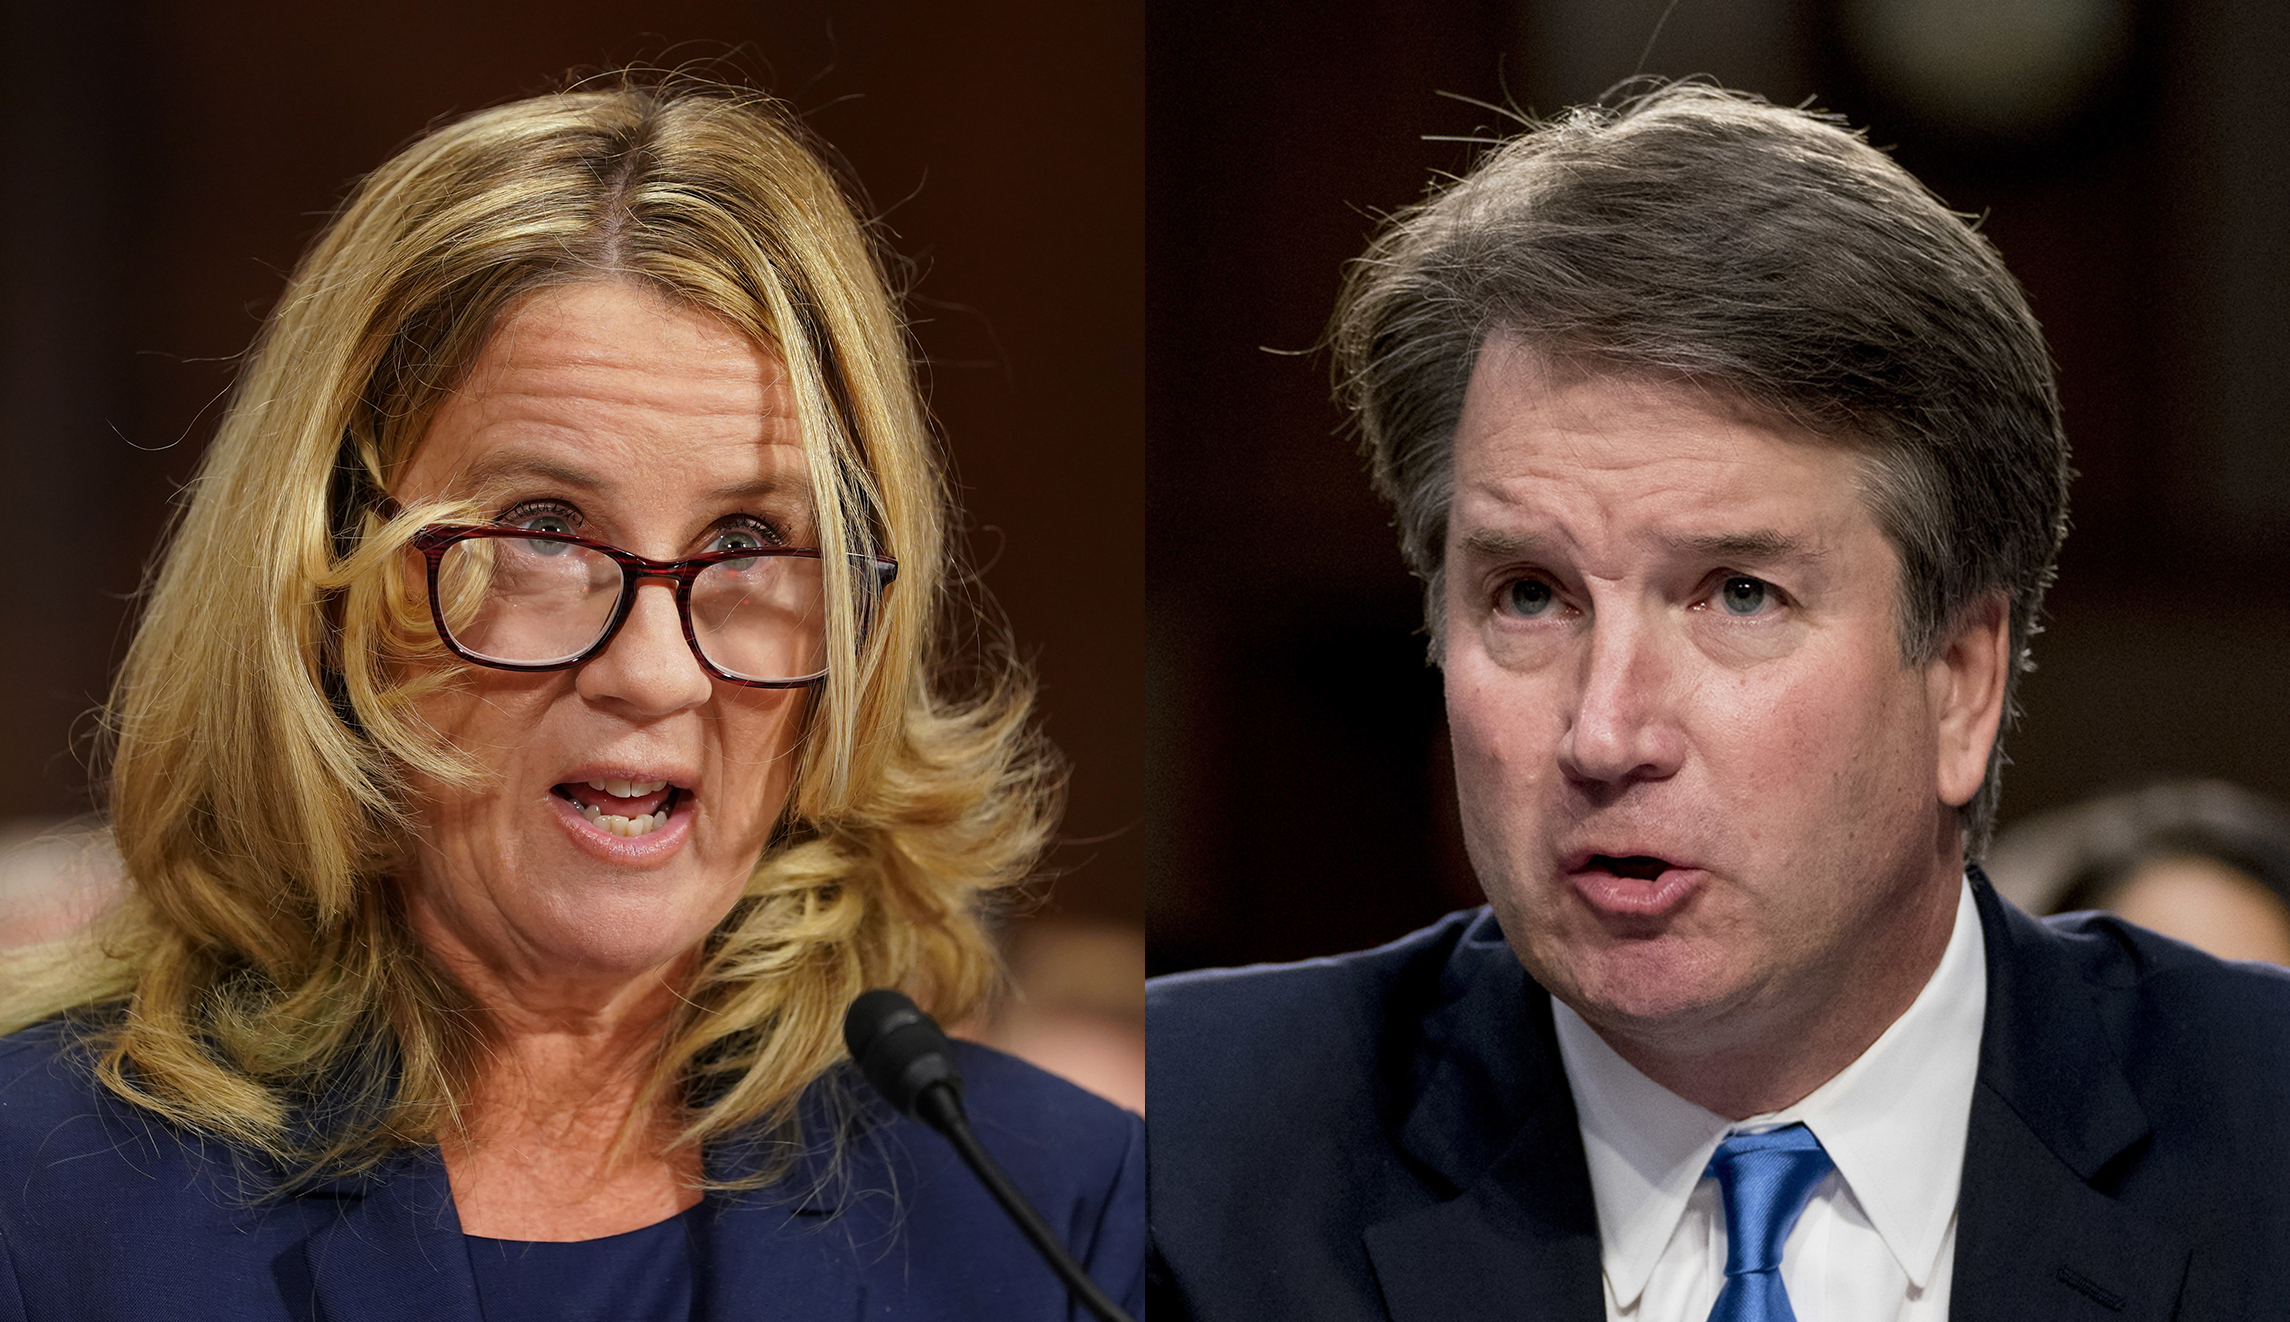 Christine Blasey Ford is pictured on the left; Brett Kavanaugh is pictured on the right.